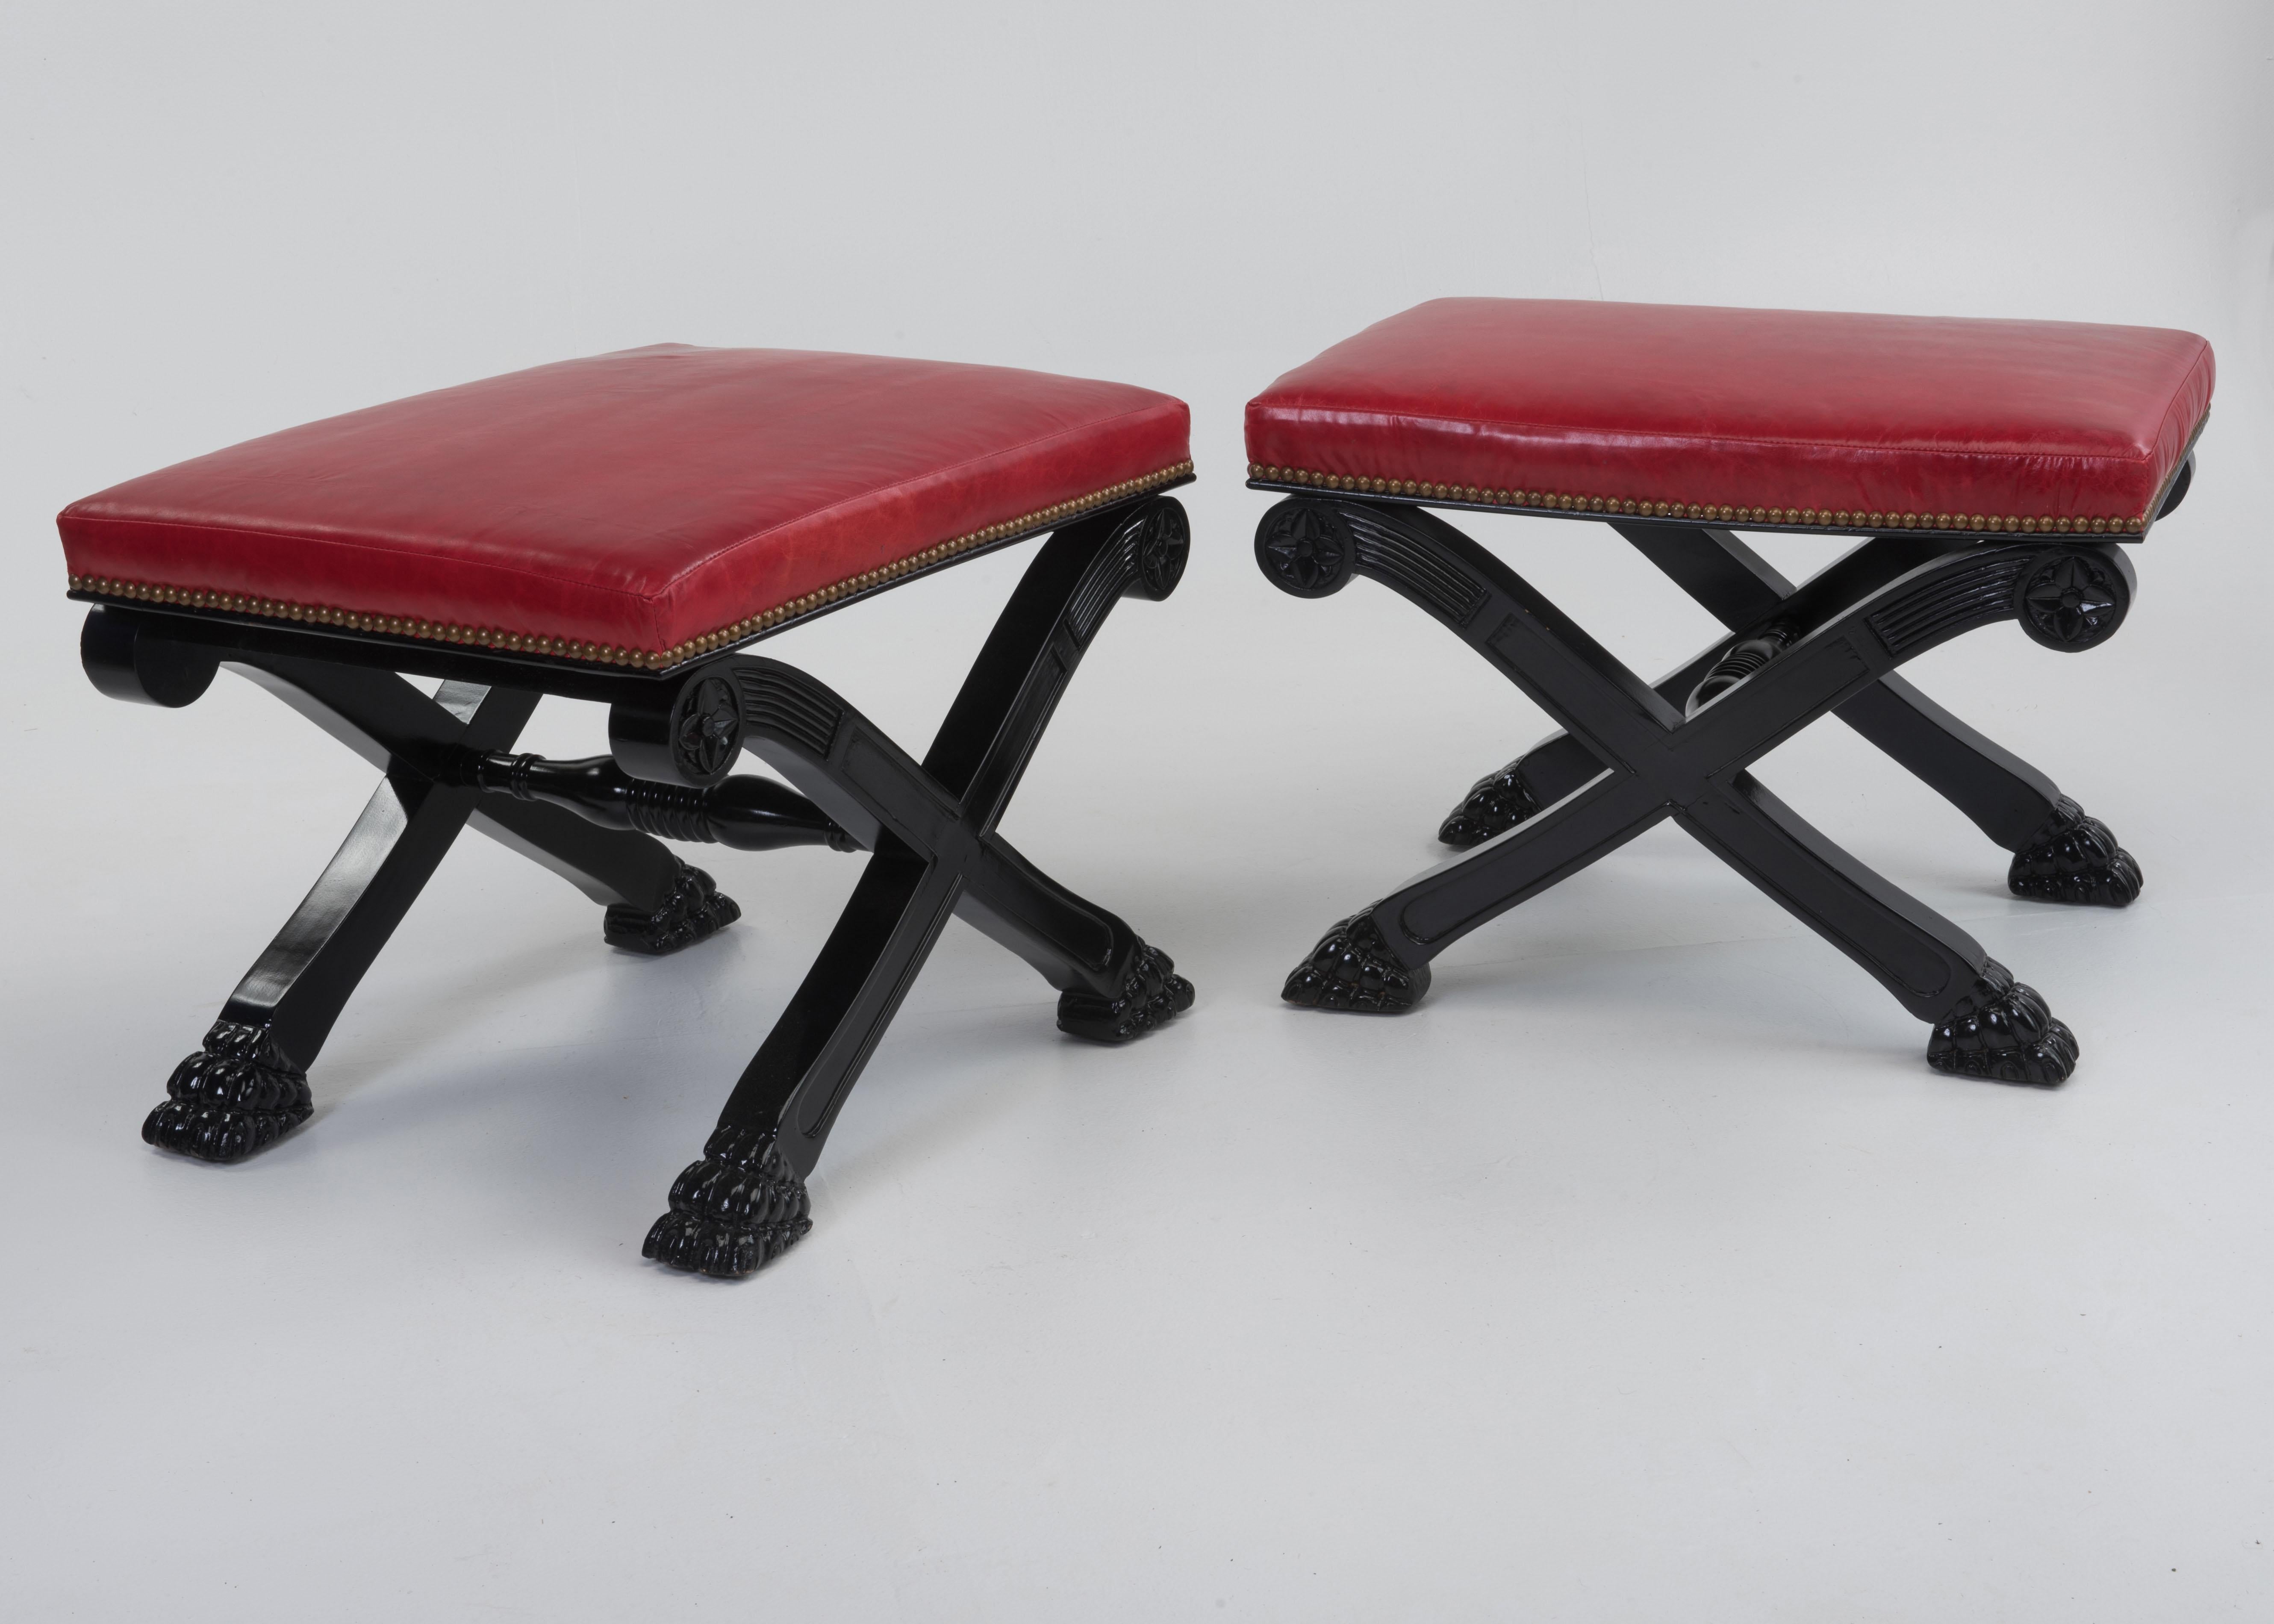 Glamorous Pair of Hollywood Regency Ebonized Benches with Red Leather Upholstery 1